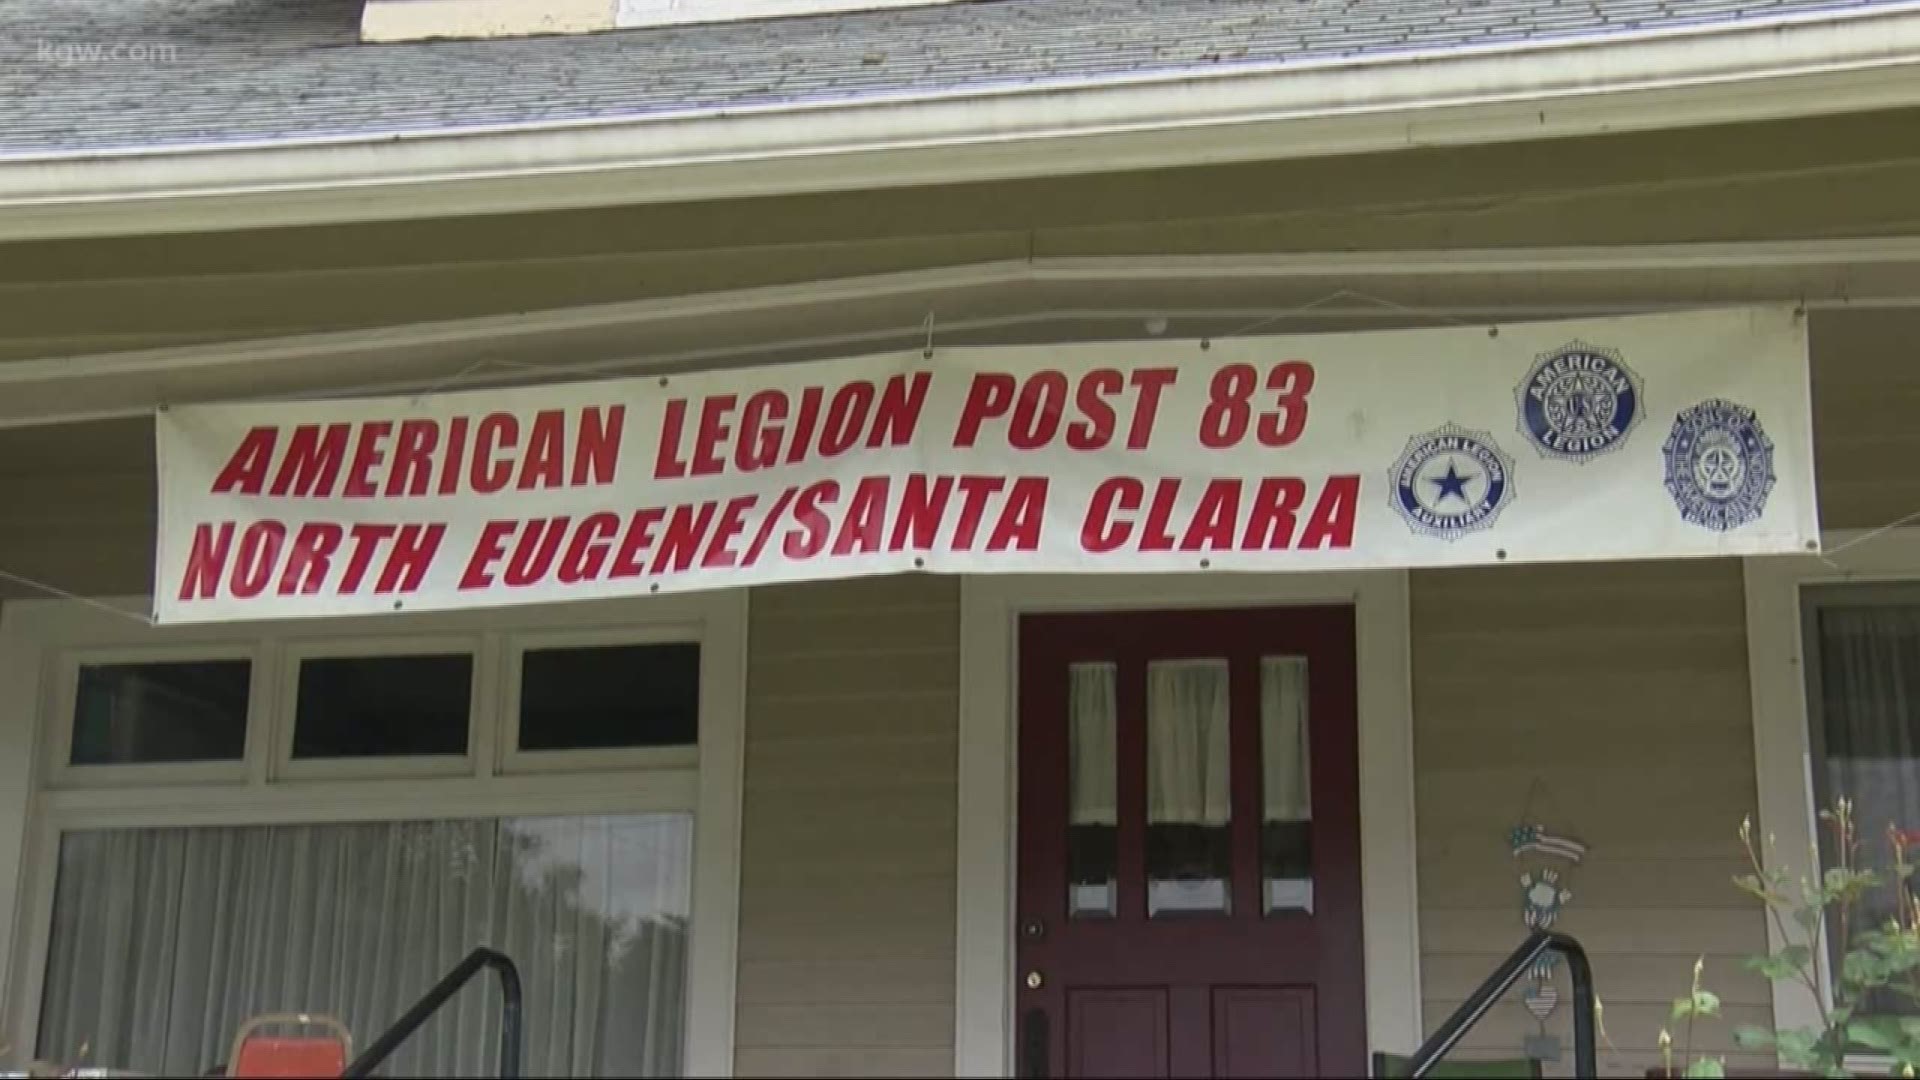 Over the weekend, someone vandalized the headquarters for American Legion Post 83 in Eugene, Oregon.